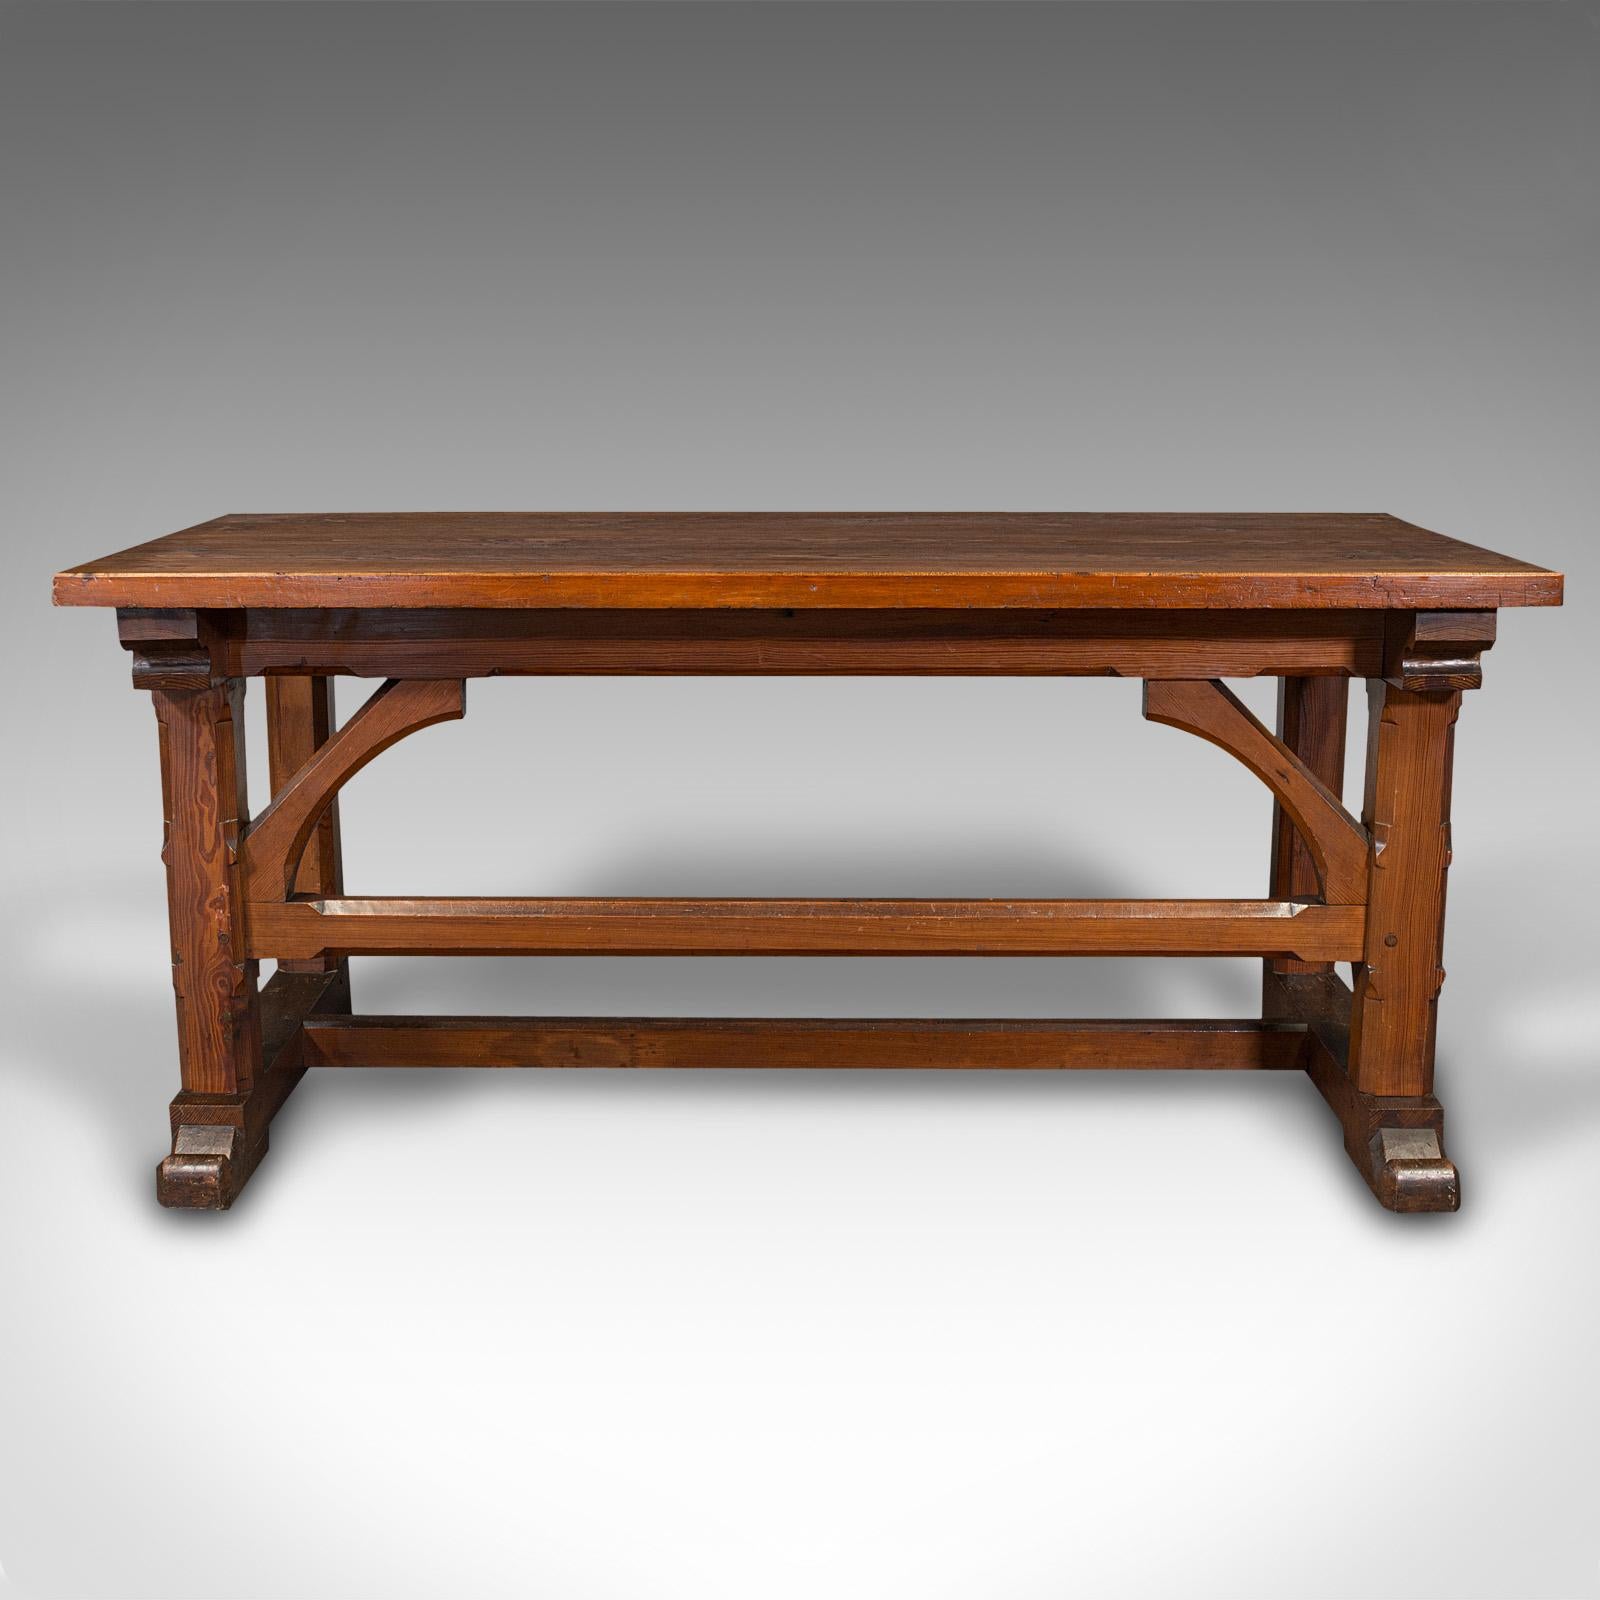 This is an antique serving table. An English, pitch pine hall table with Pugin-esque ecclesiastical taste, dating to the late Victorian period, circa 1880.

Appealing table of generous proportion and Gothic overtones
Displays a desirable aged